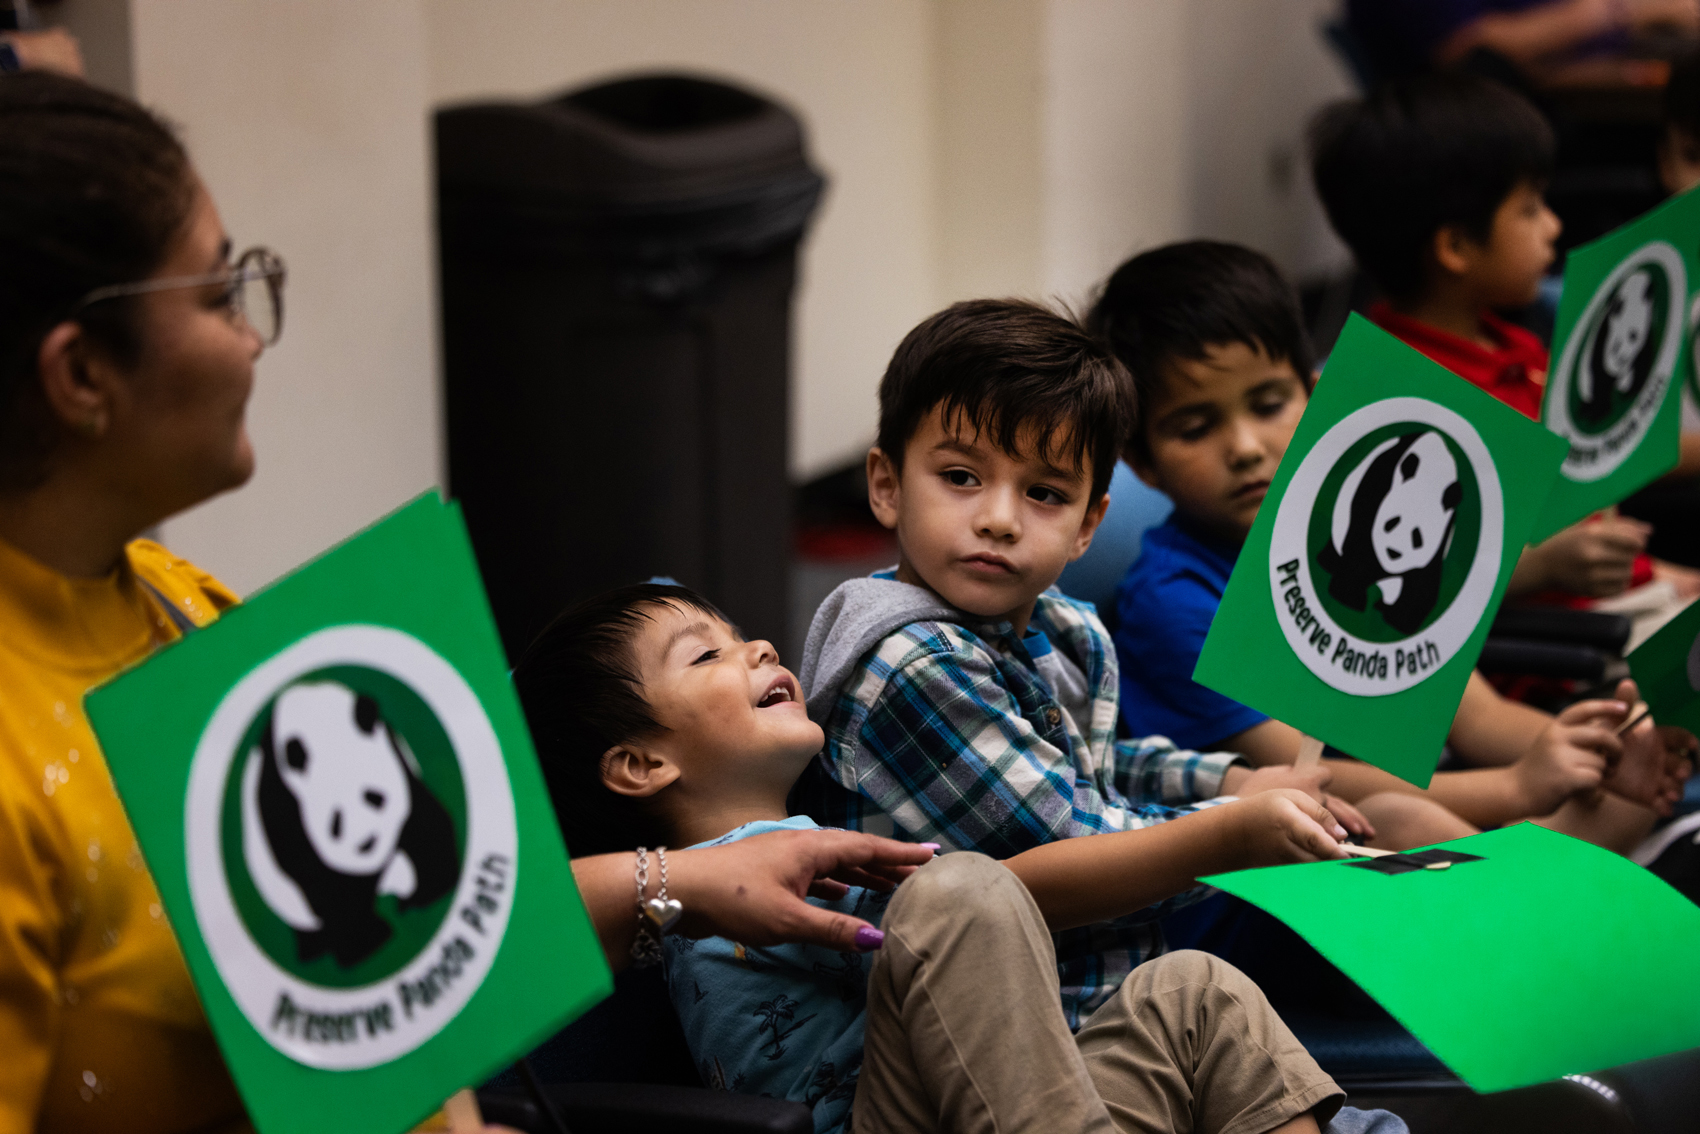 Iann Ramos, center, 5, looks around while holding a sign that says "Preserve Panda Path" at a Spring Branch Independent District board meeting, Monday, Nov. 6, 2023, in Houston